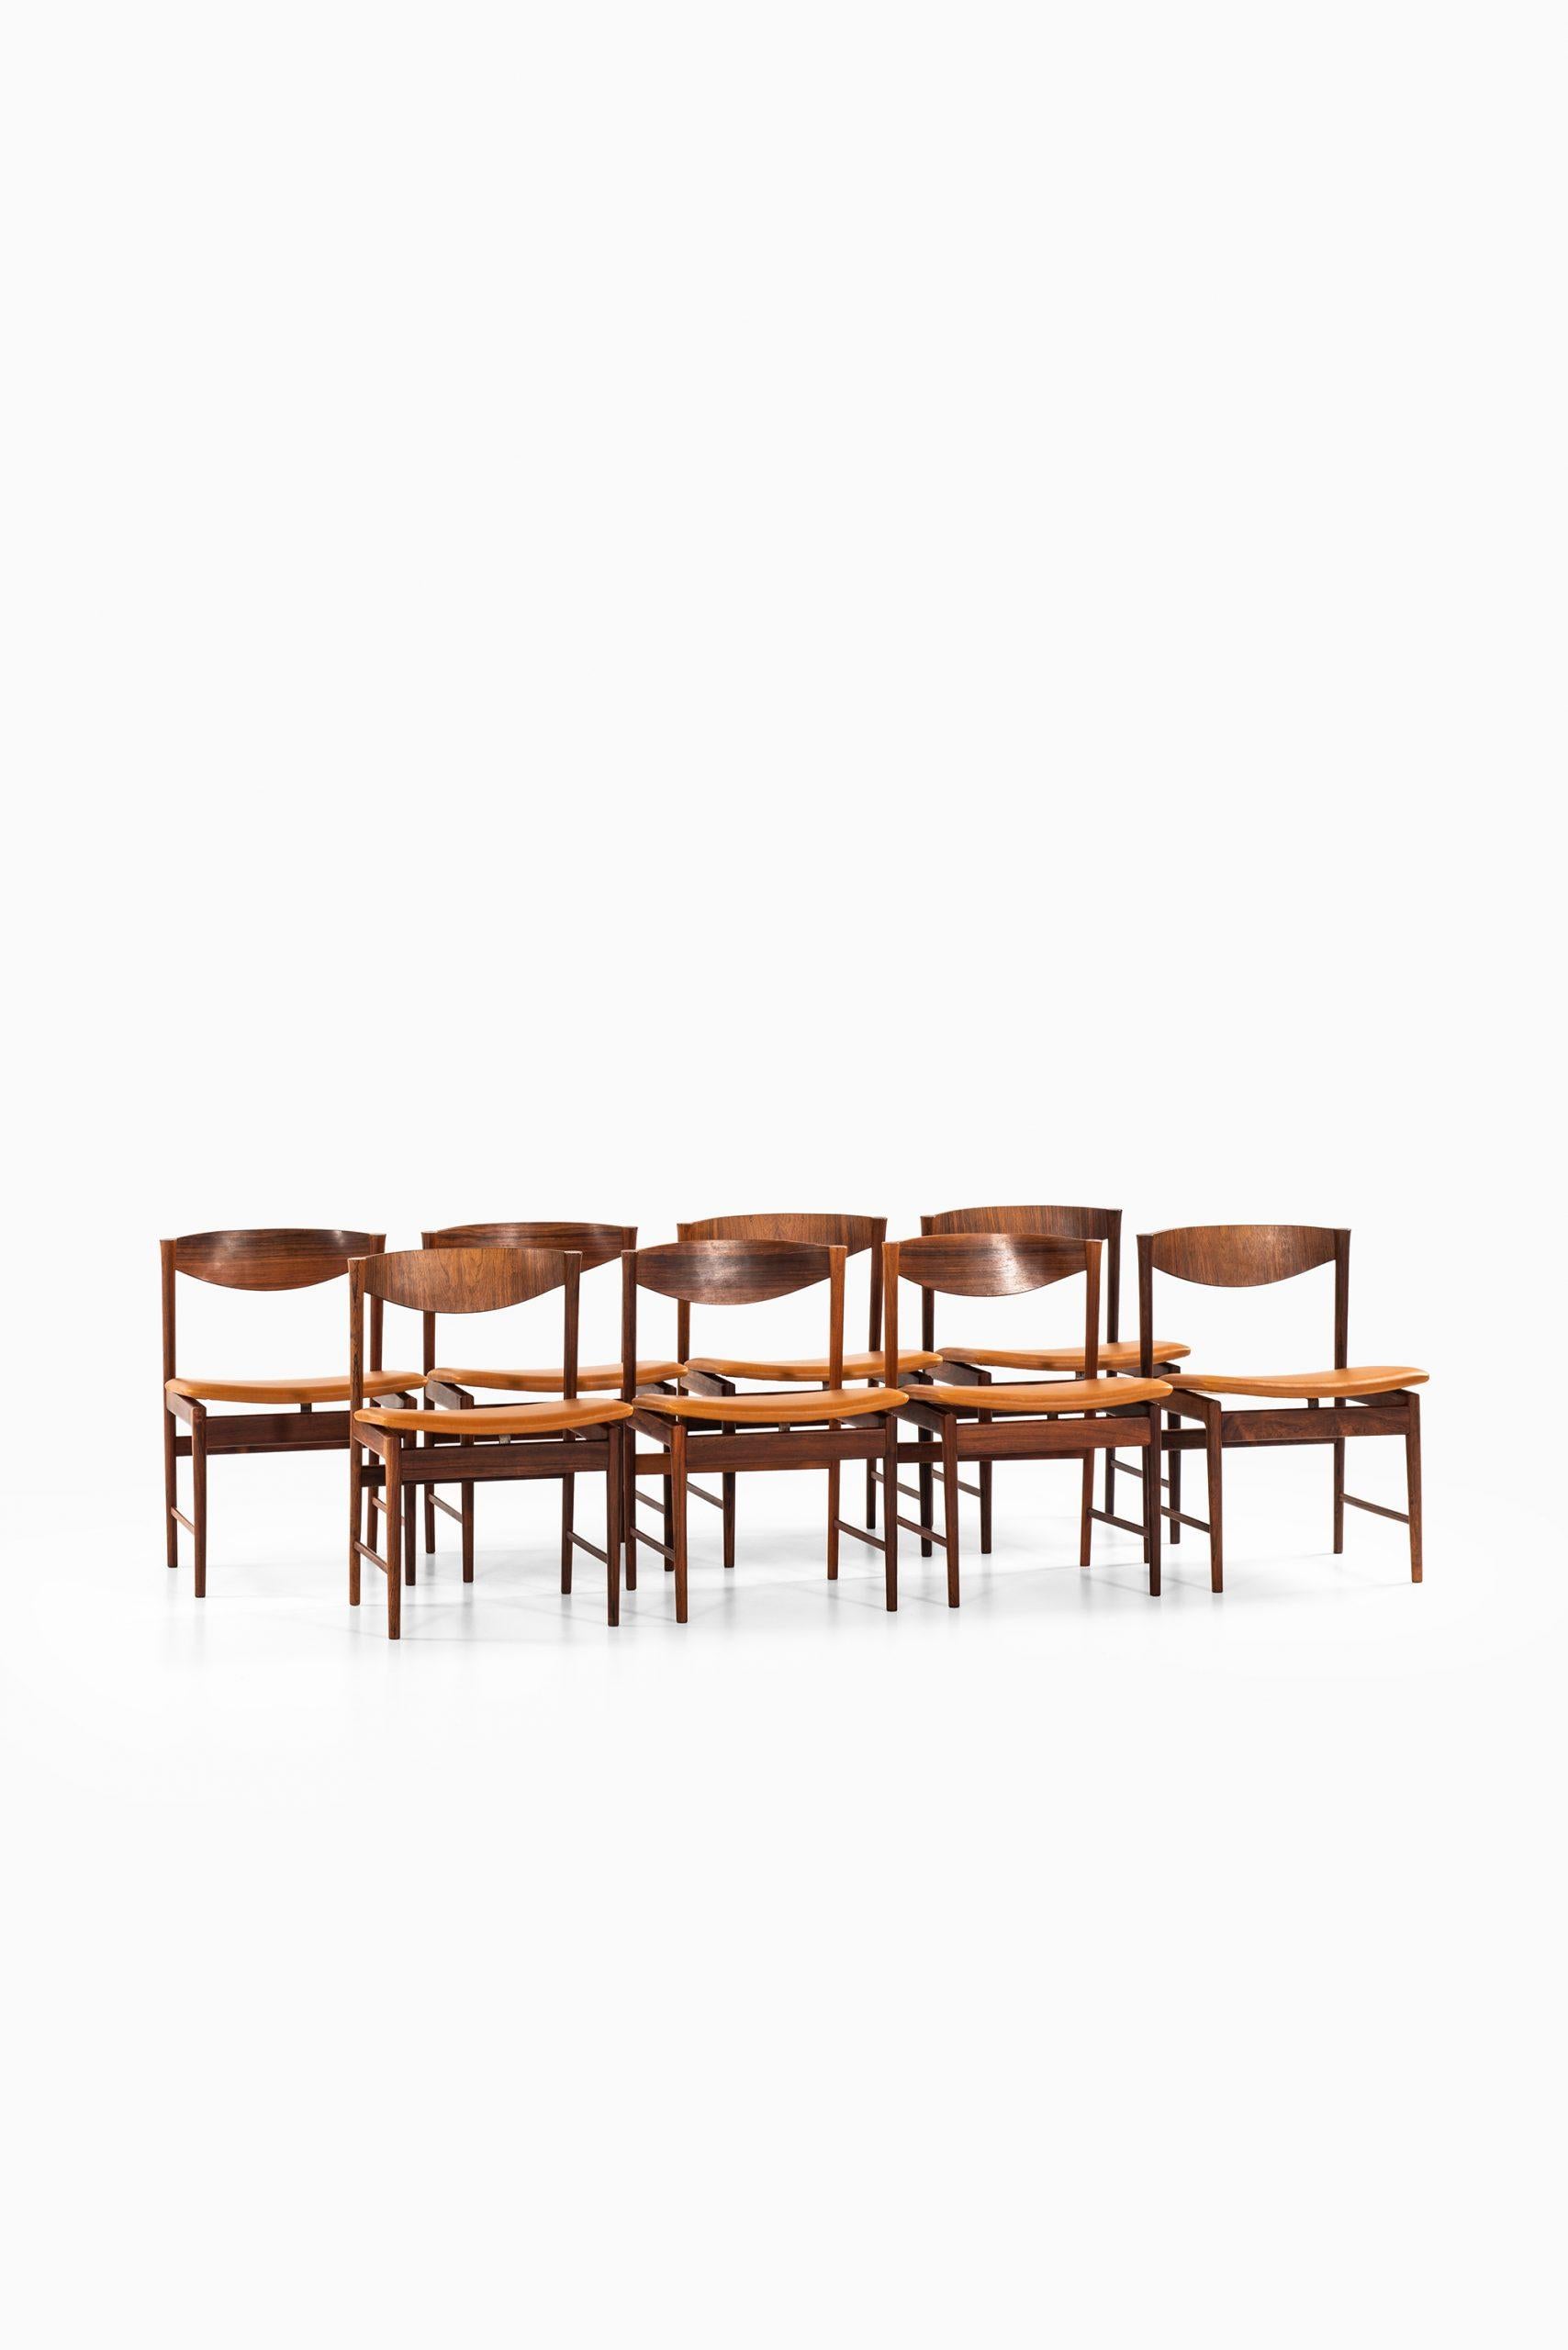 Rare set of 8 dining chairs designed by Ib Kofod-Larsen. Produced by Seffle Möbelfabrik in Sweden.